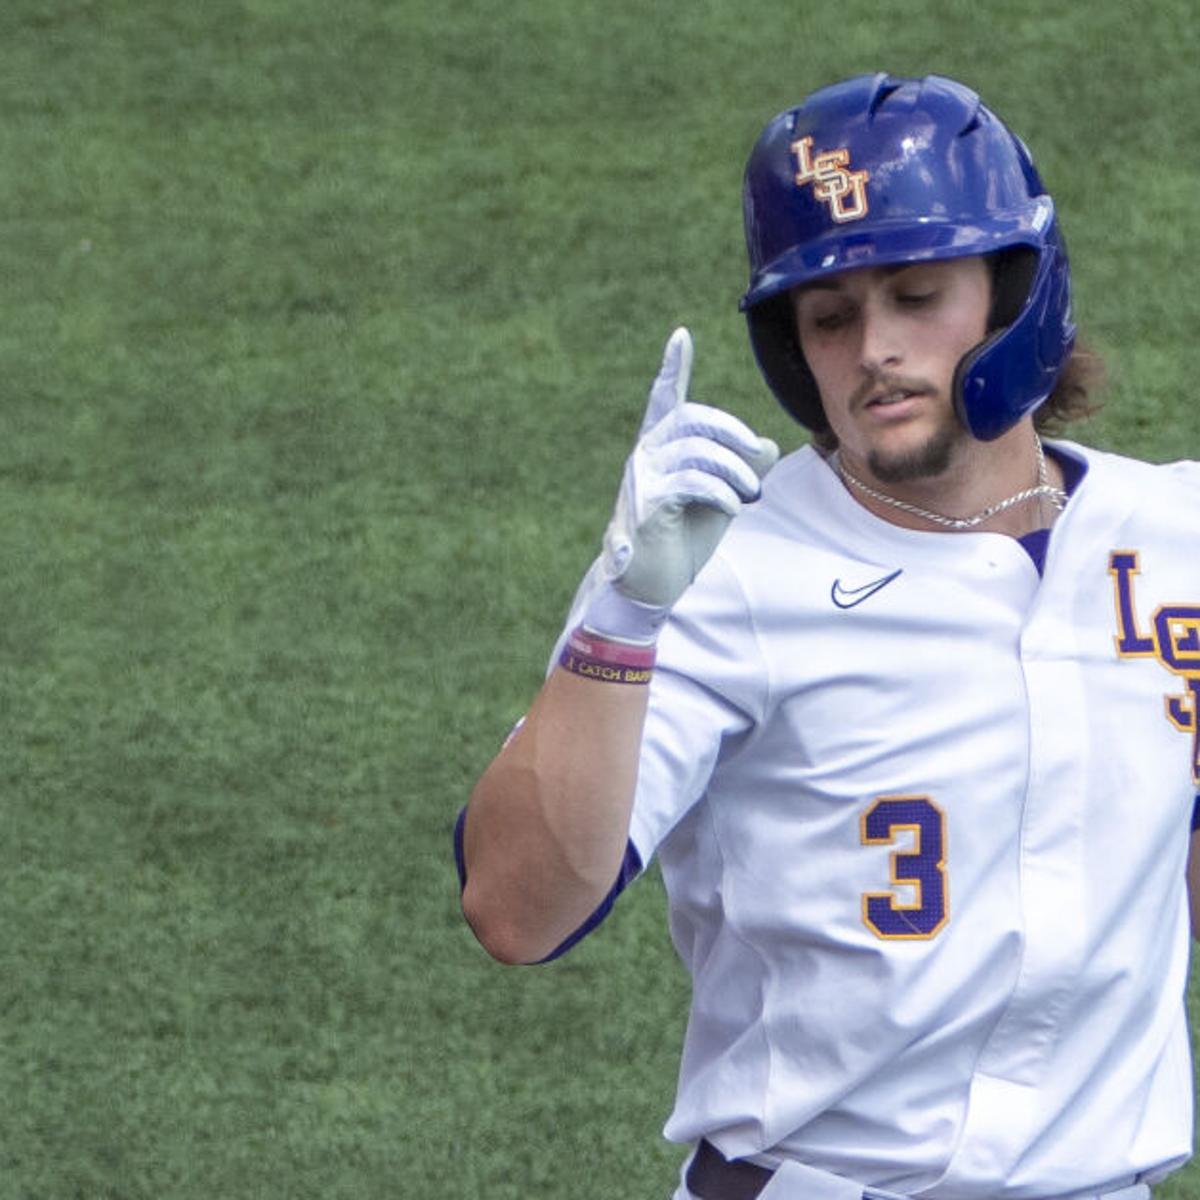 Lsu Baseball Schedule 2022 Printable Lsu Releases 2022 Baseball Schedule; See Key Dates, Opponents And  Intriguing Road Trips | Lsu | Theadvocate.com